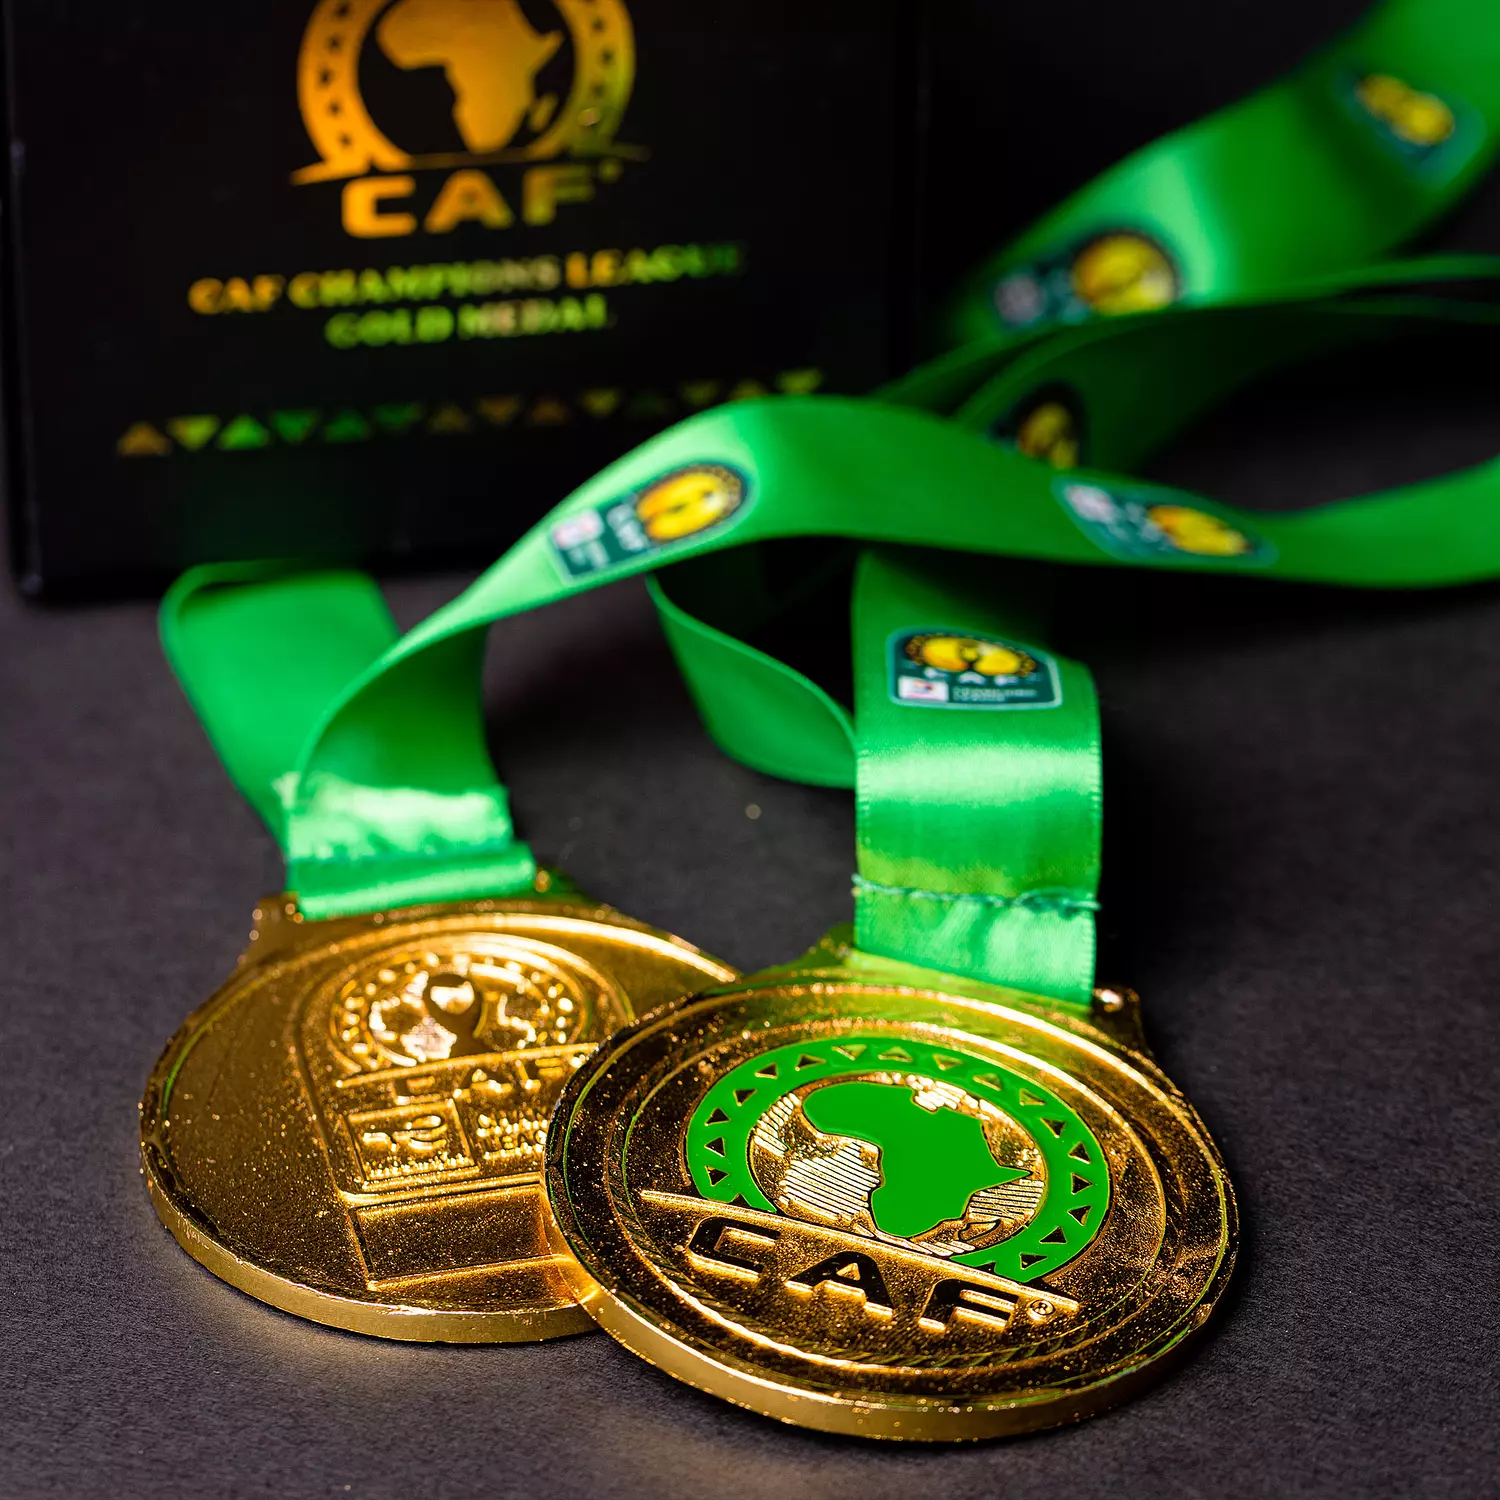 CAF Champions League " Gold Medal " 1